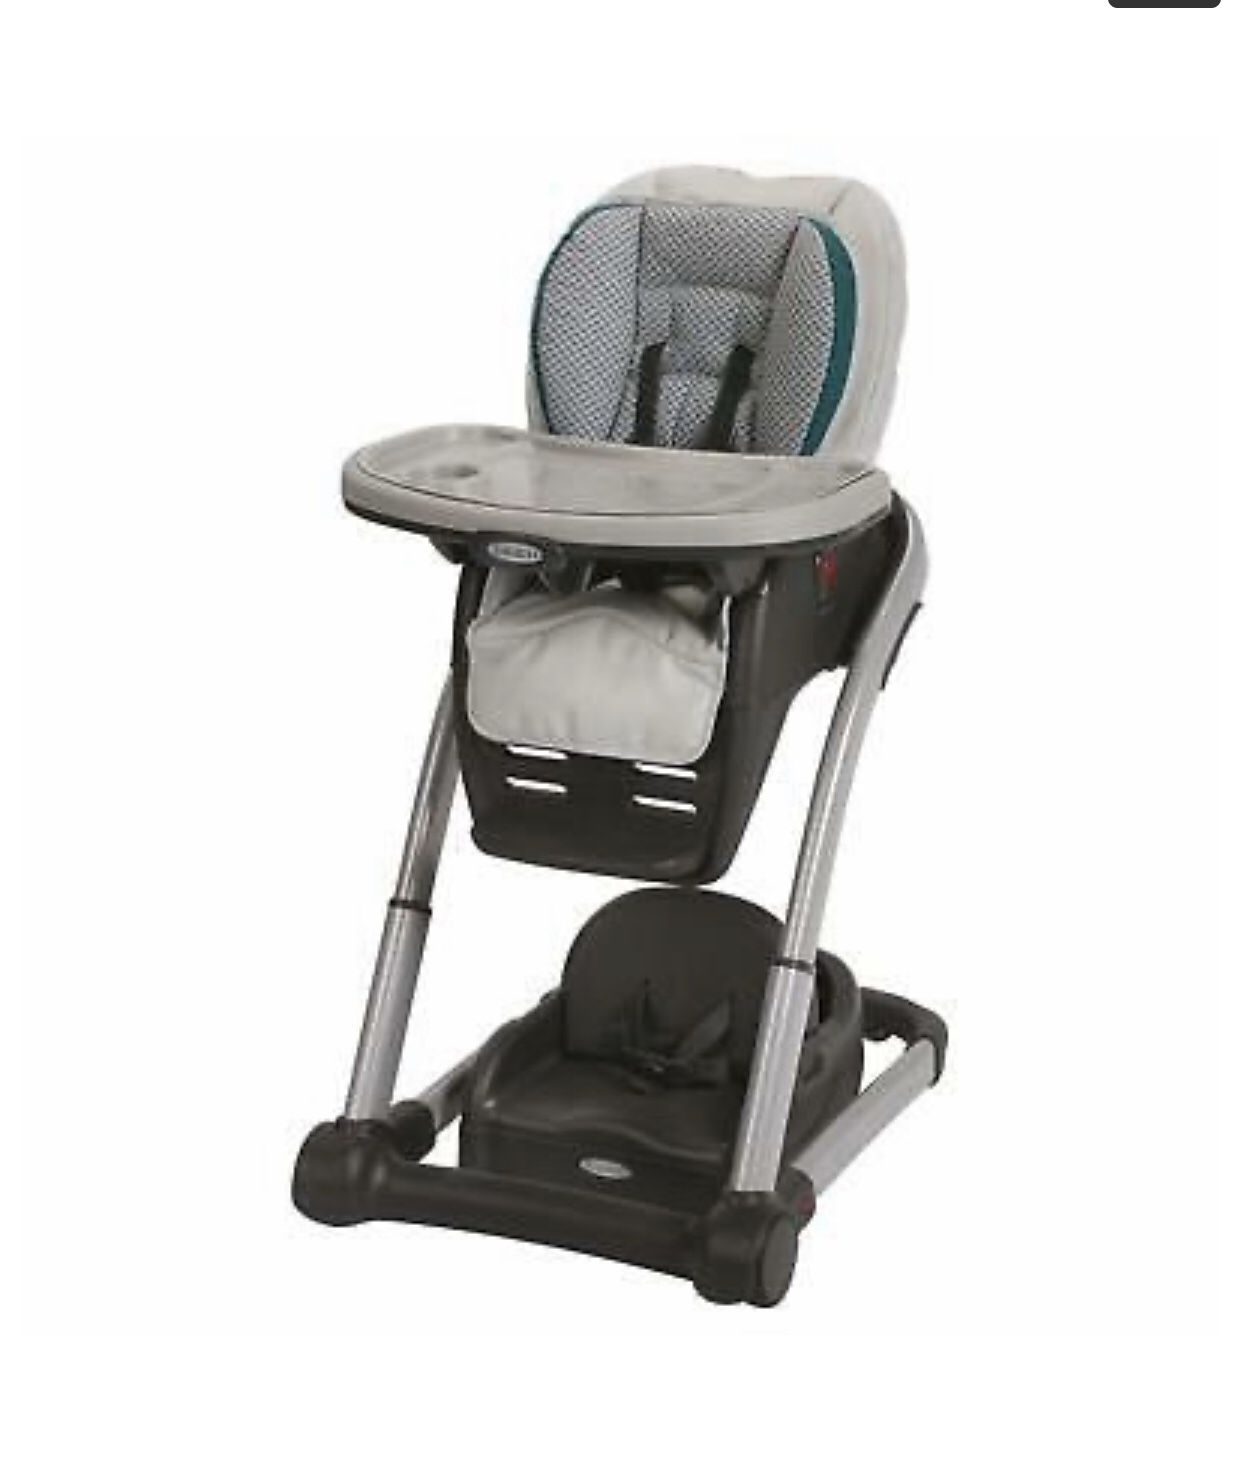 Graco Blossom 6-in-1 Convertible High Chair, Sapphire